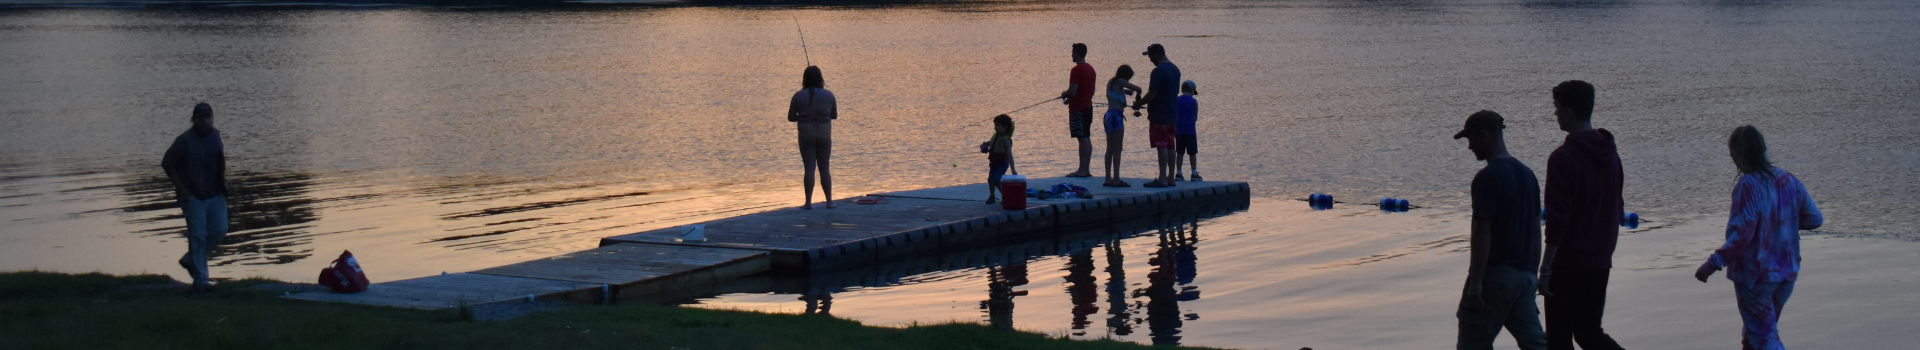 People fishing off dock at dusk in South Frontenac